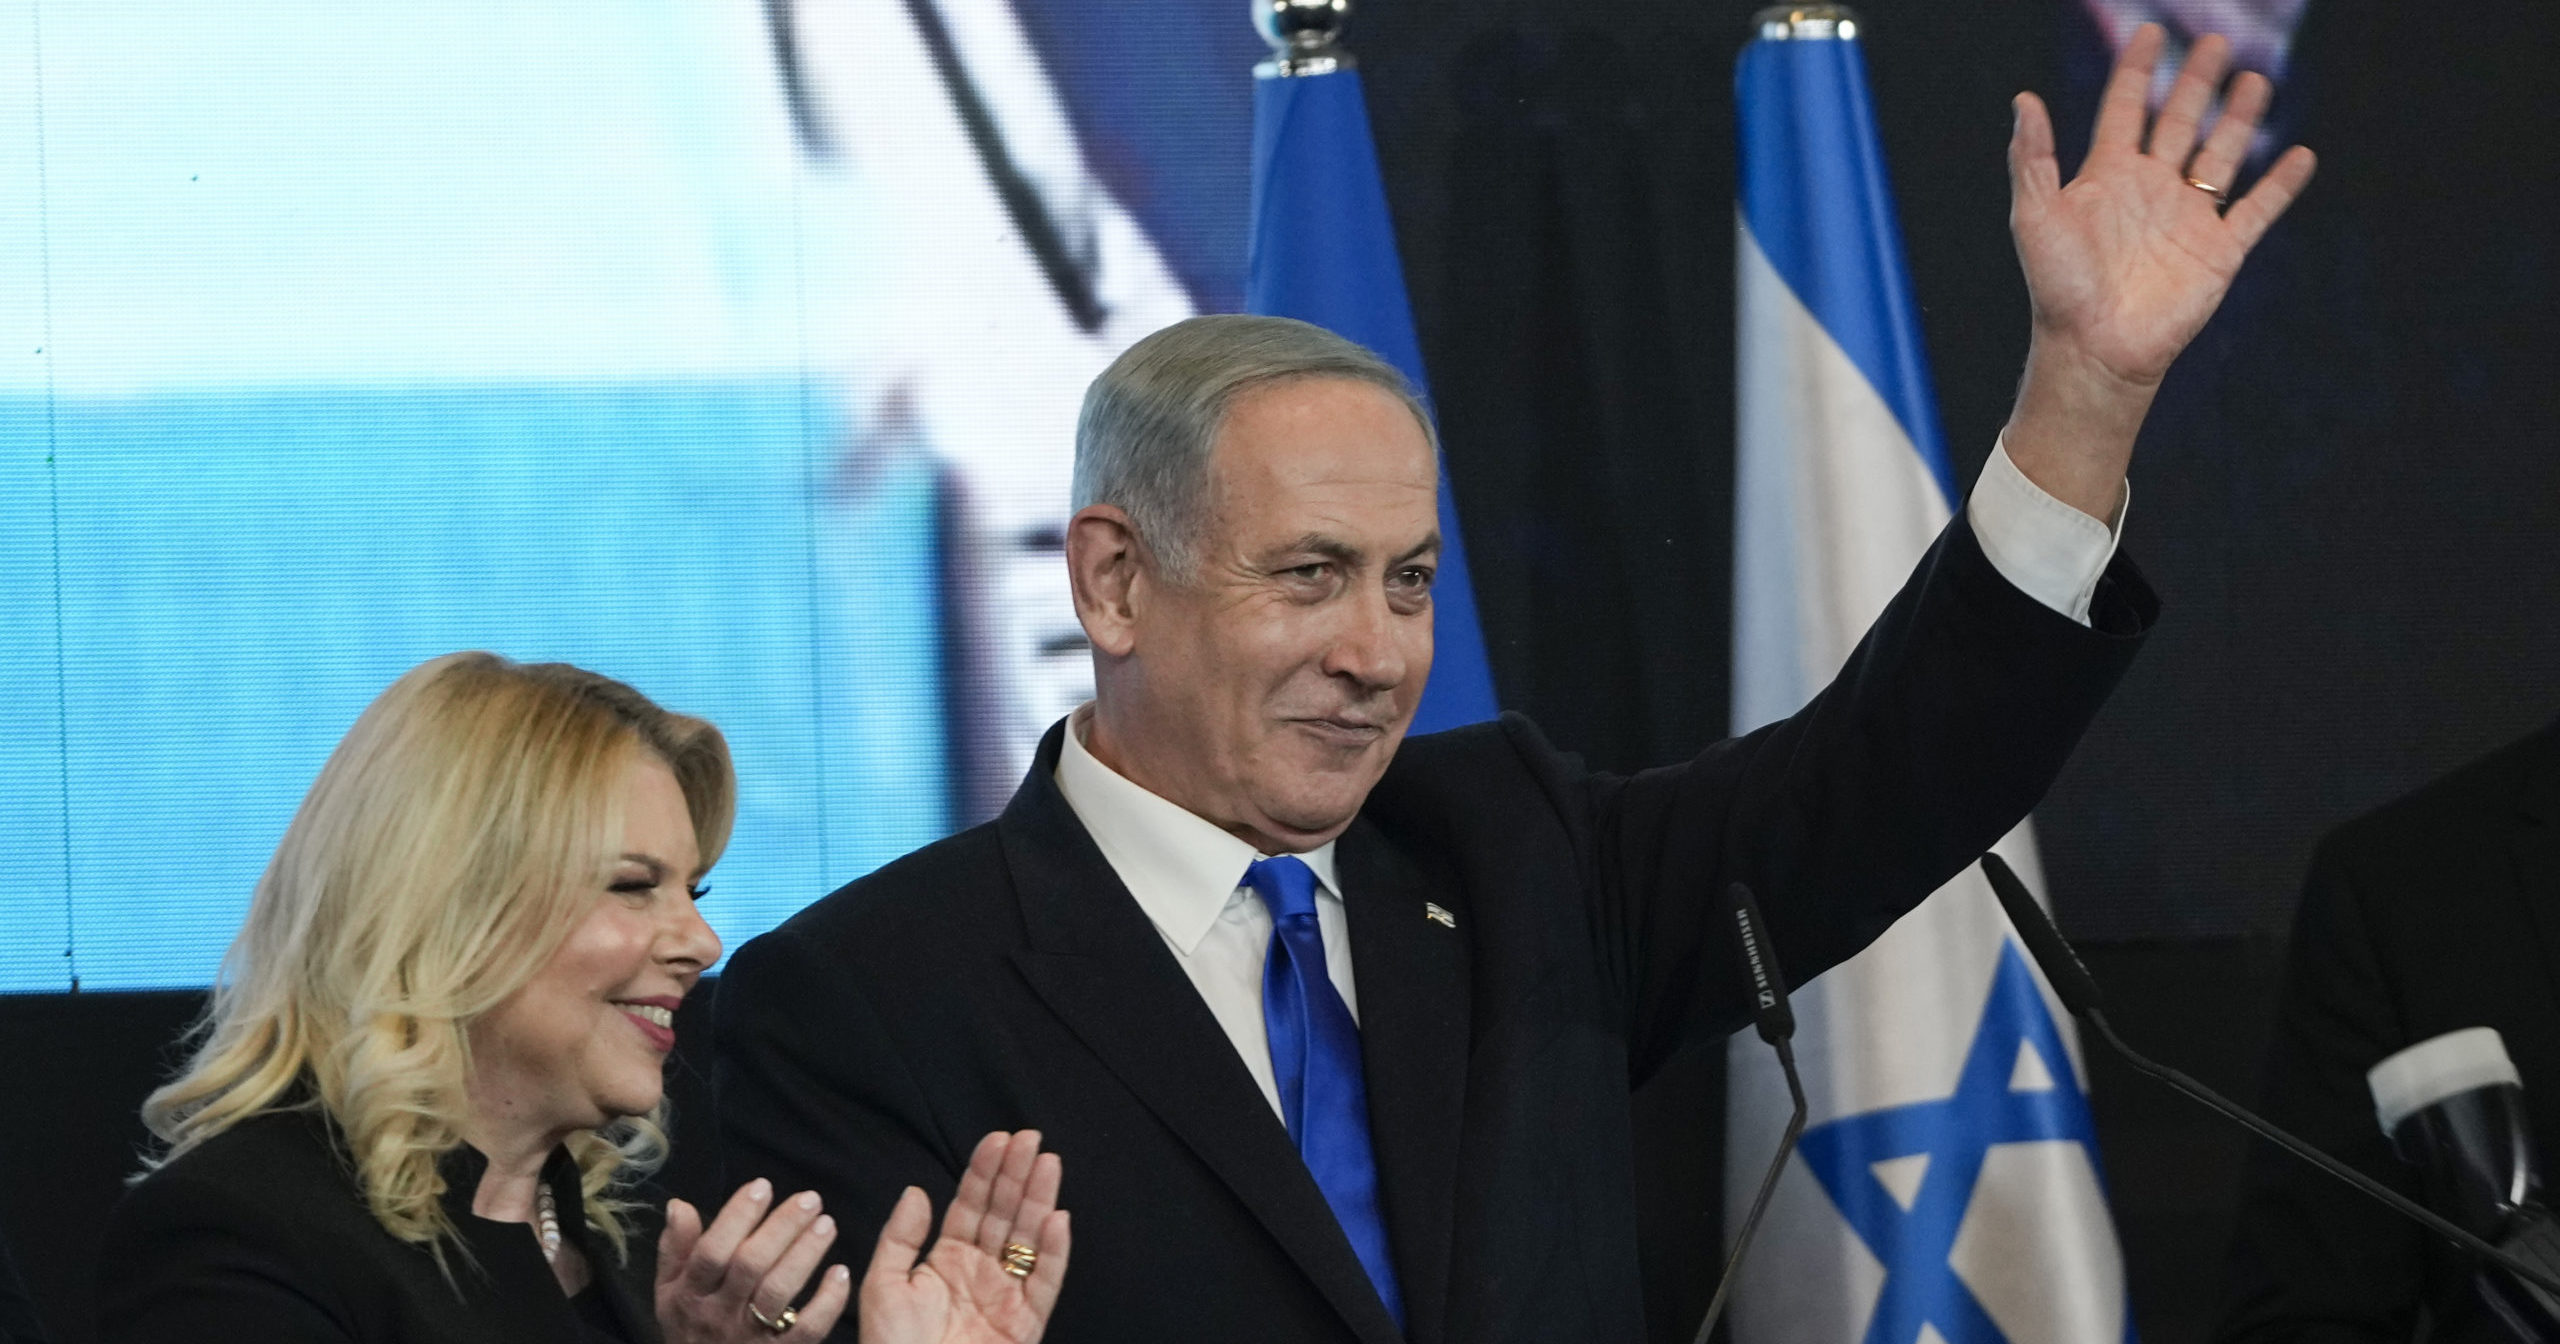 Benjamin Netanyahu, former Israeli Prime Minister and the head of the Likud party, is accompanied by his wife Sara as he waves to his supporters after the first exit poll results for the Israeli Parliamentary election at his party's headquarters in Jerusalem, Israel, on Wednesday.